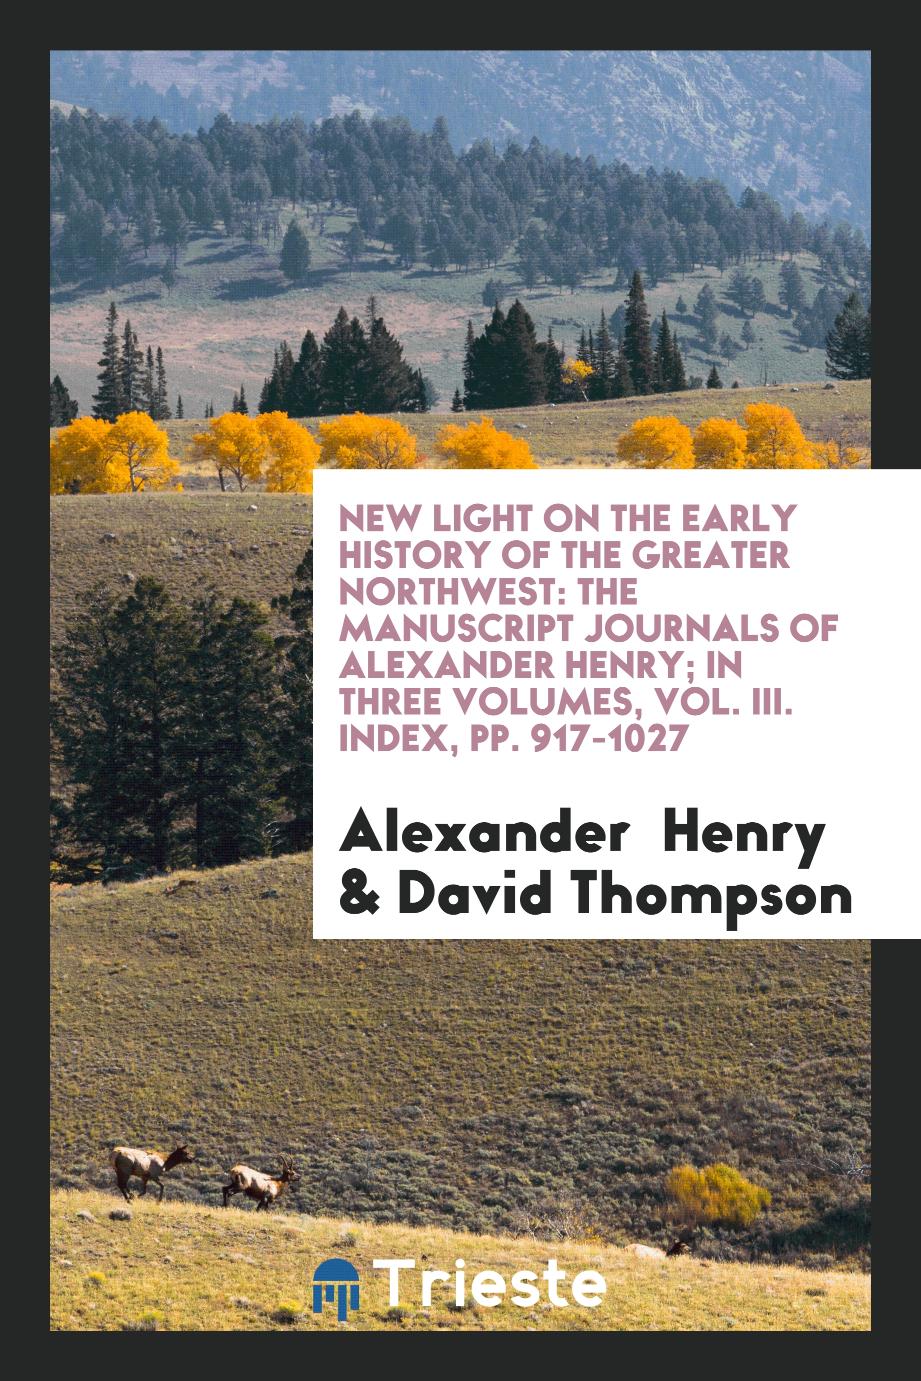 New Light on the Early History of the Greater Northwest: The Manuscript Journals of Alexander Henry; In Three Volumes, Vol. III. Index, pp. 917-1027